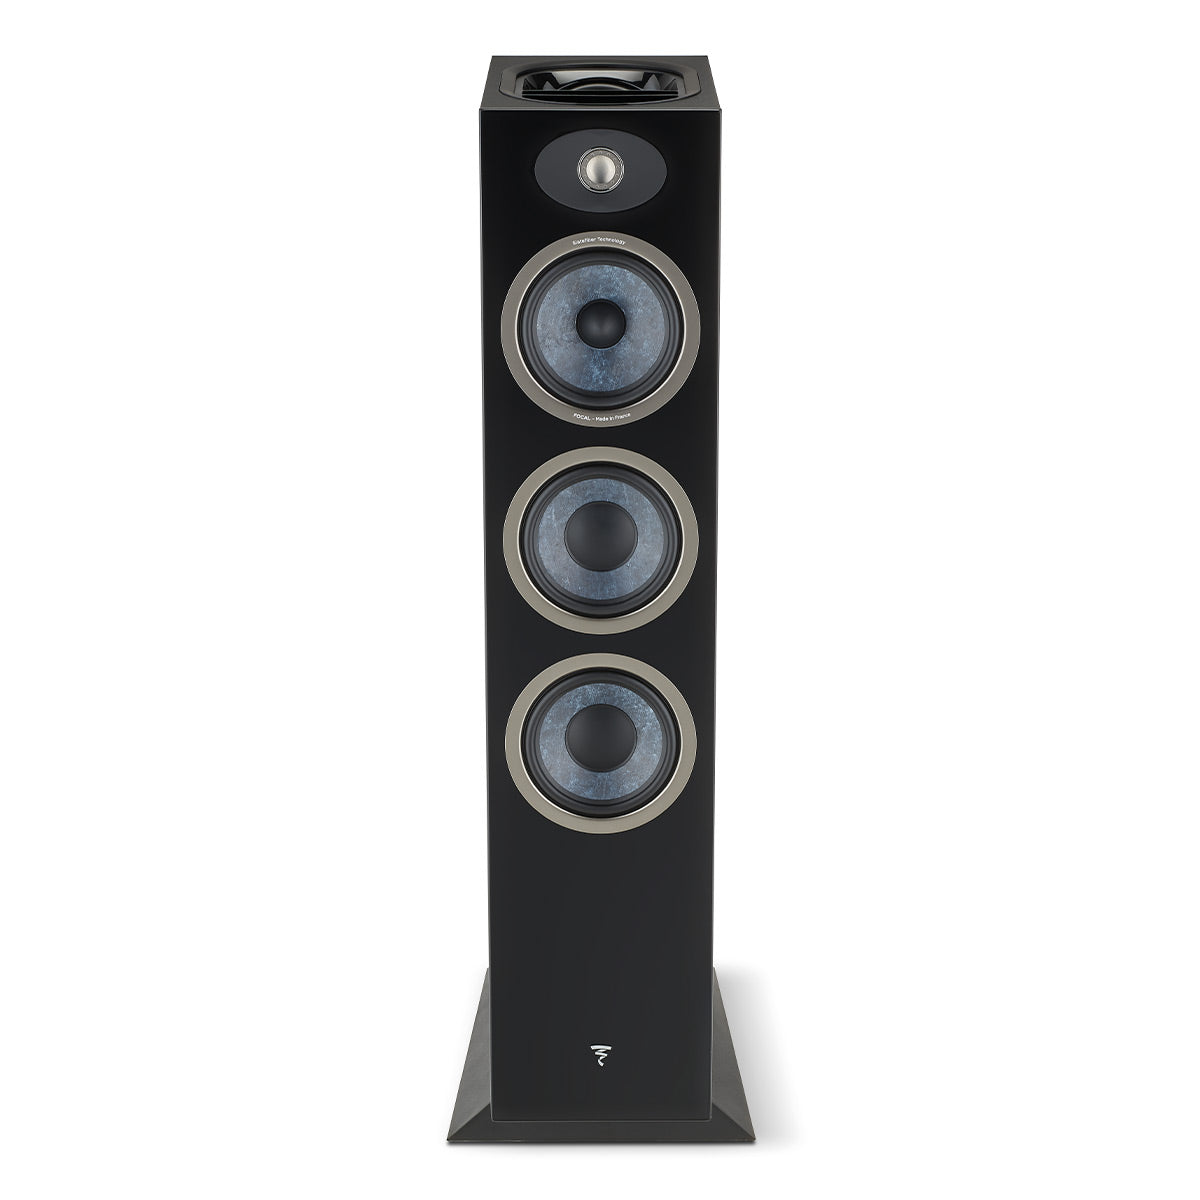 Focal Theva No.3-D 3-Way Bass-Reflex Floorstanding Loudspeaker with 5" Full-Range Up-Firing Driver for Dolby Atmos Effects - Each (Black)